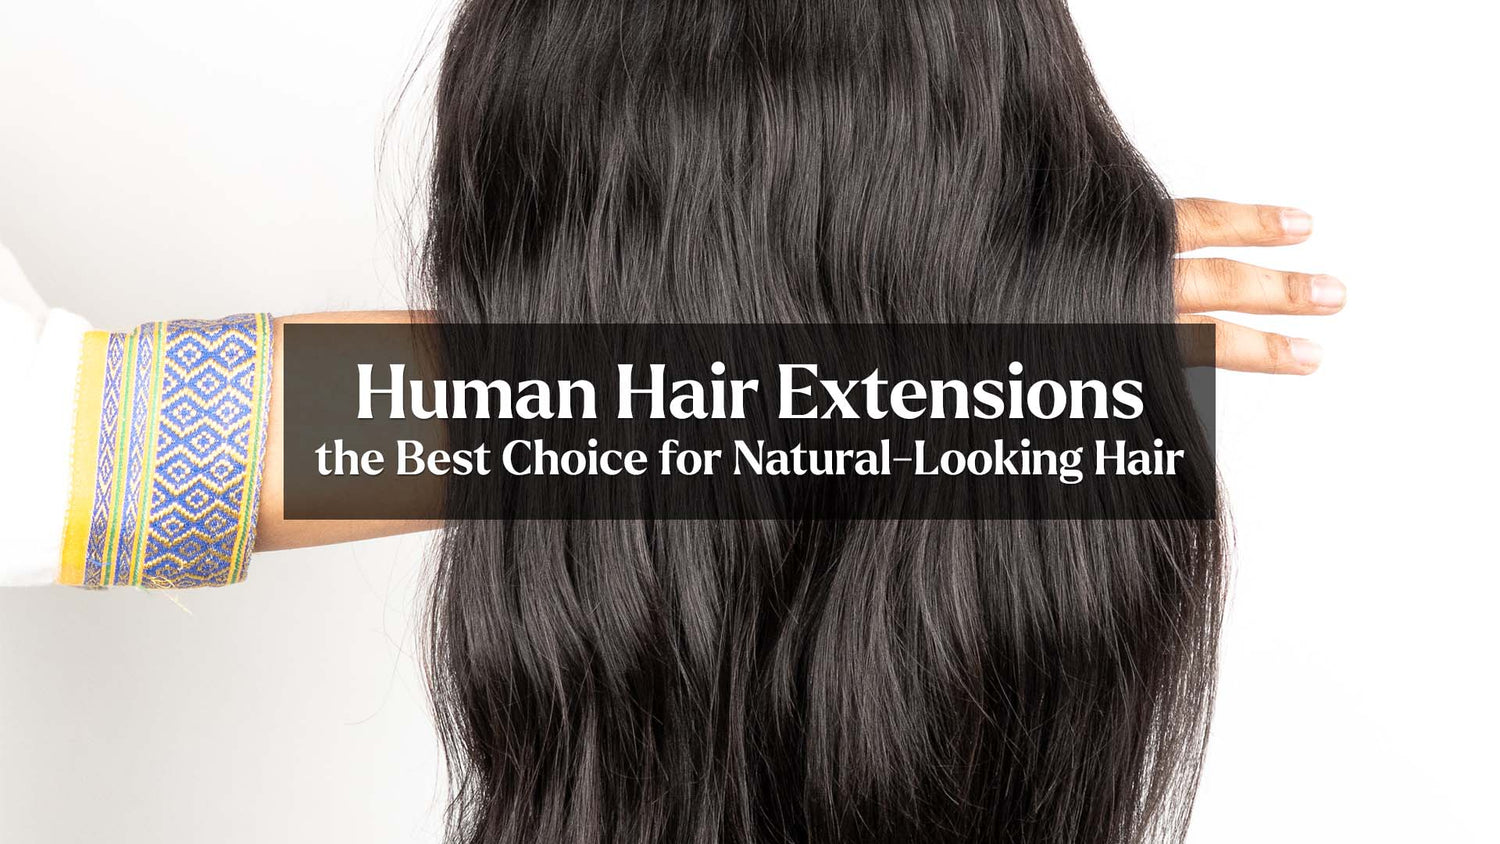 Human Hair Extensions: the Best Choice for Natural-Looking Hair